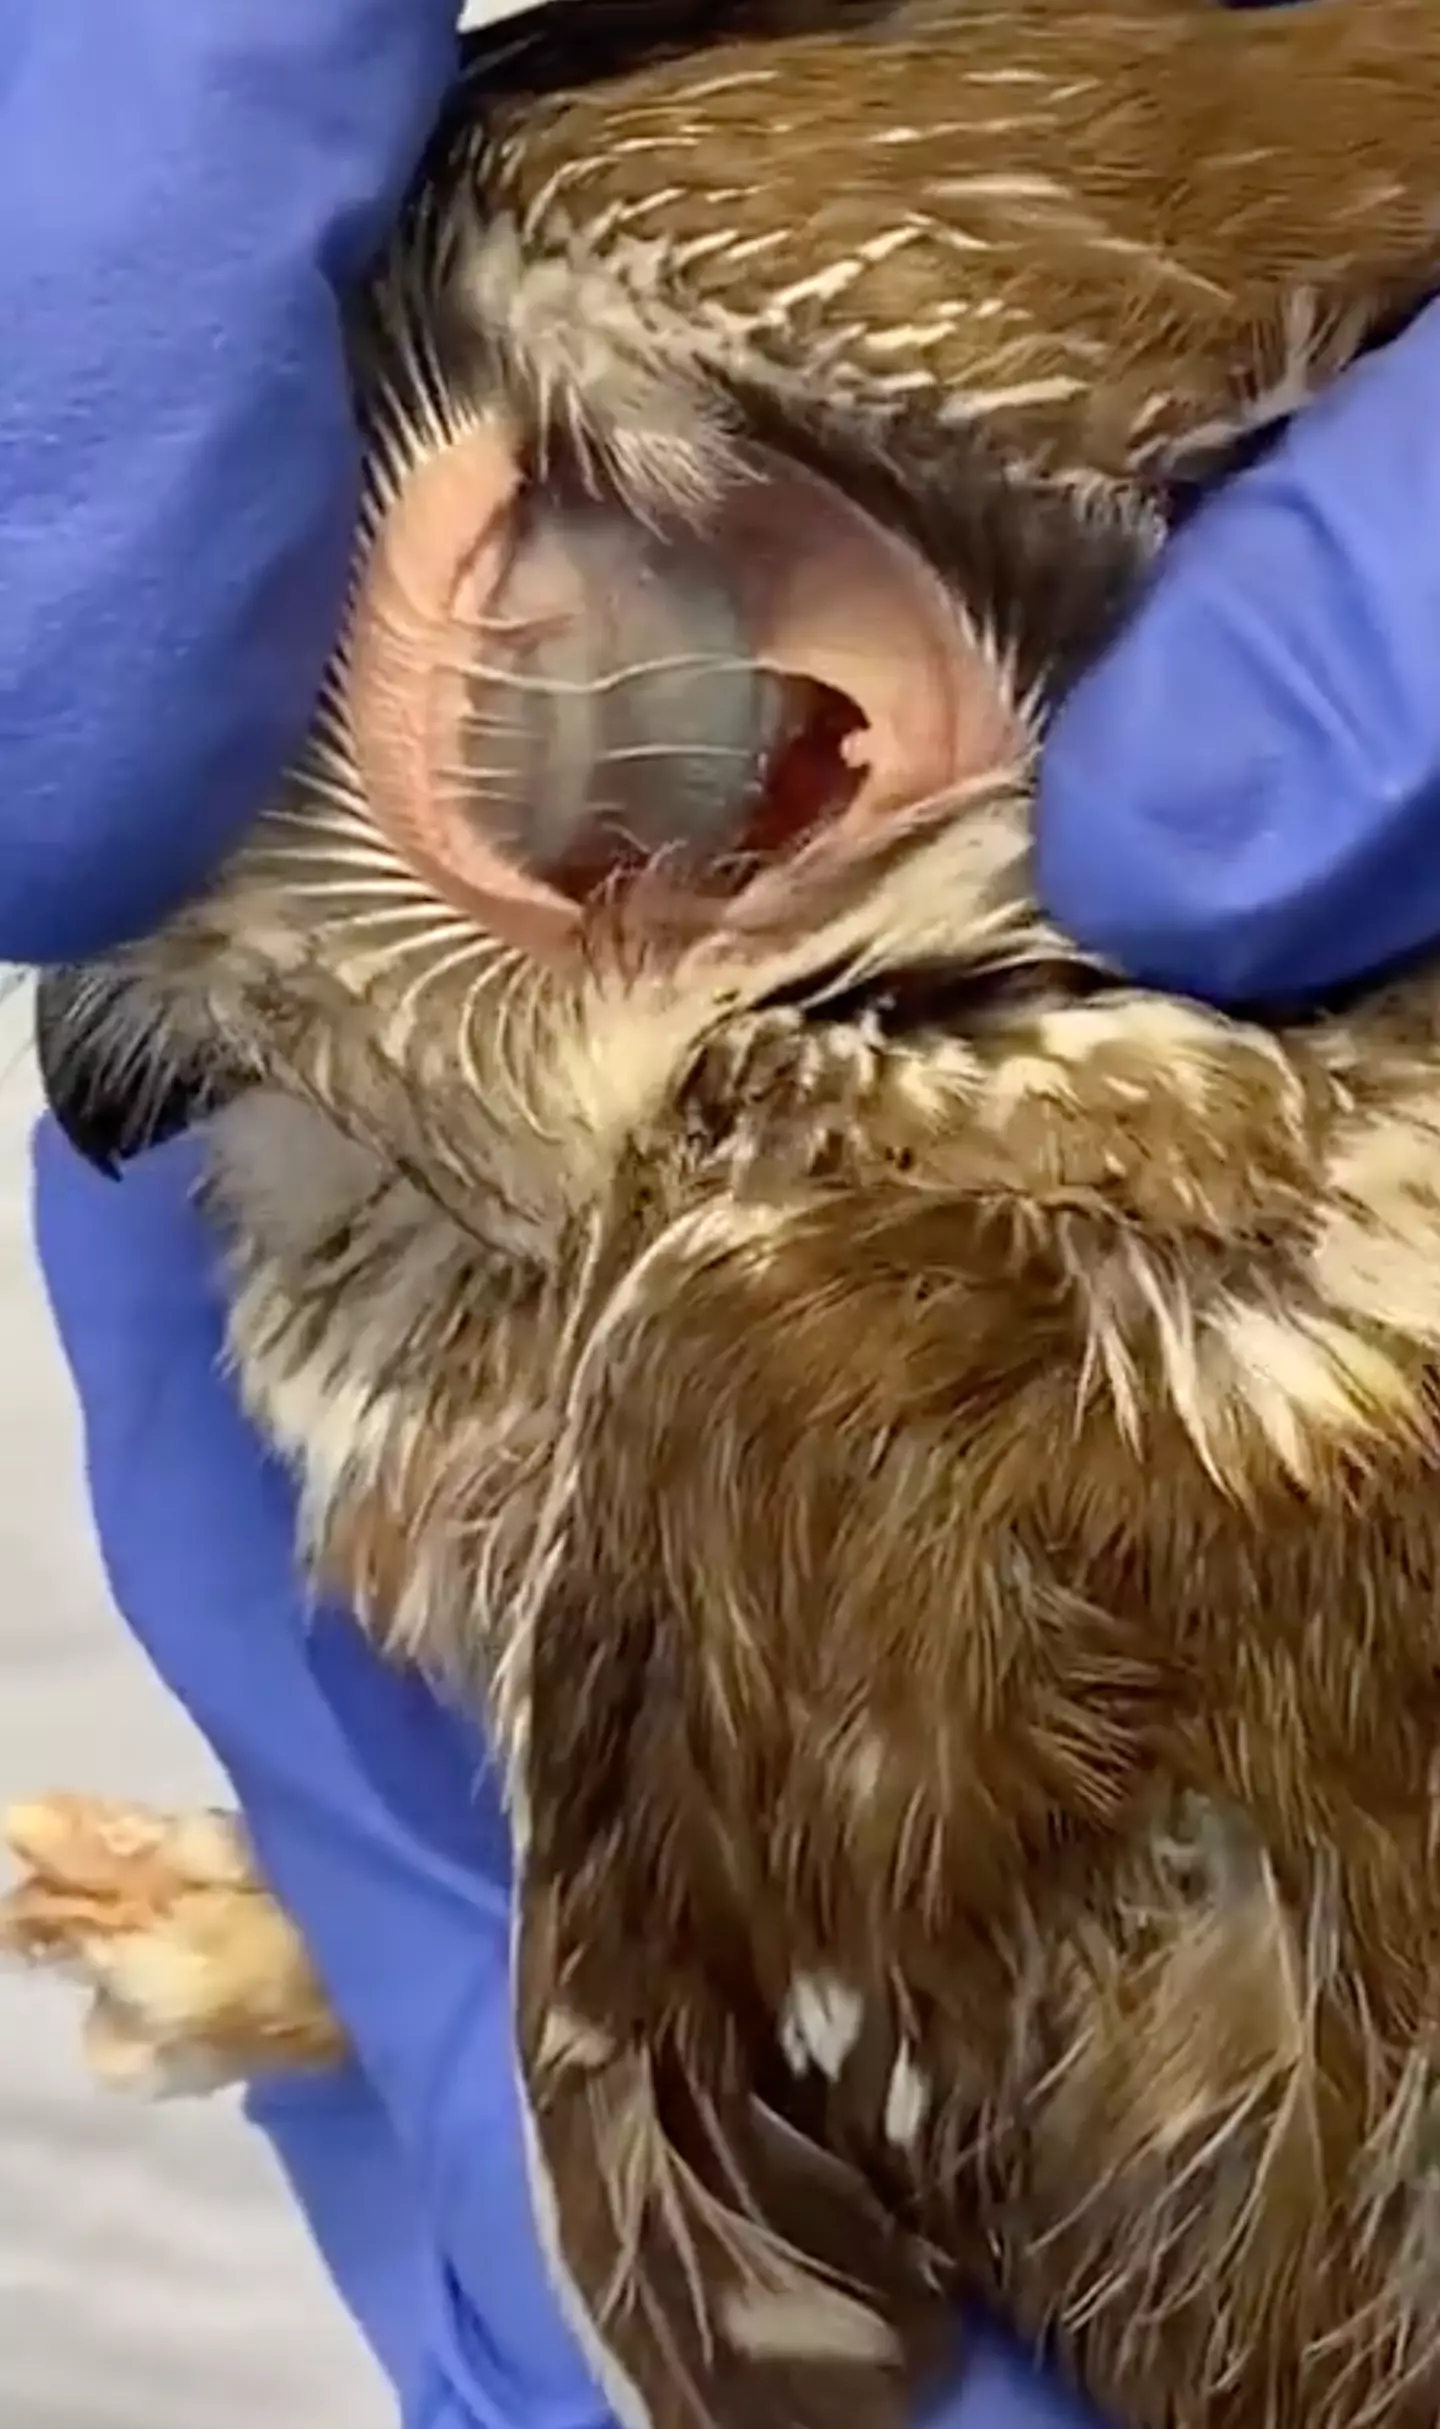 The owl's ear looked almost alien.